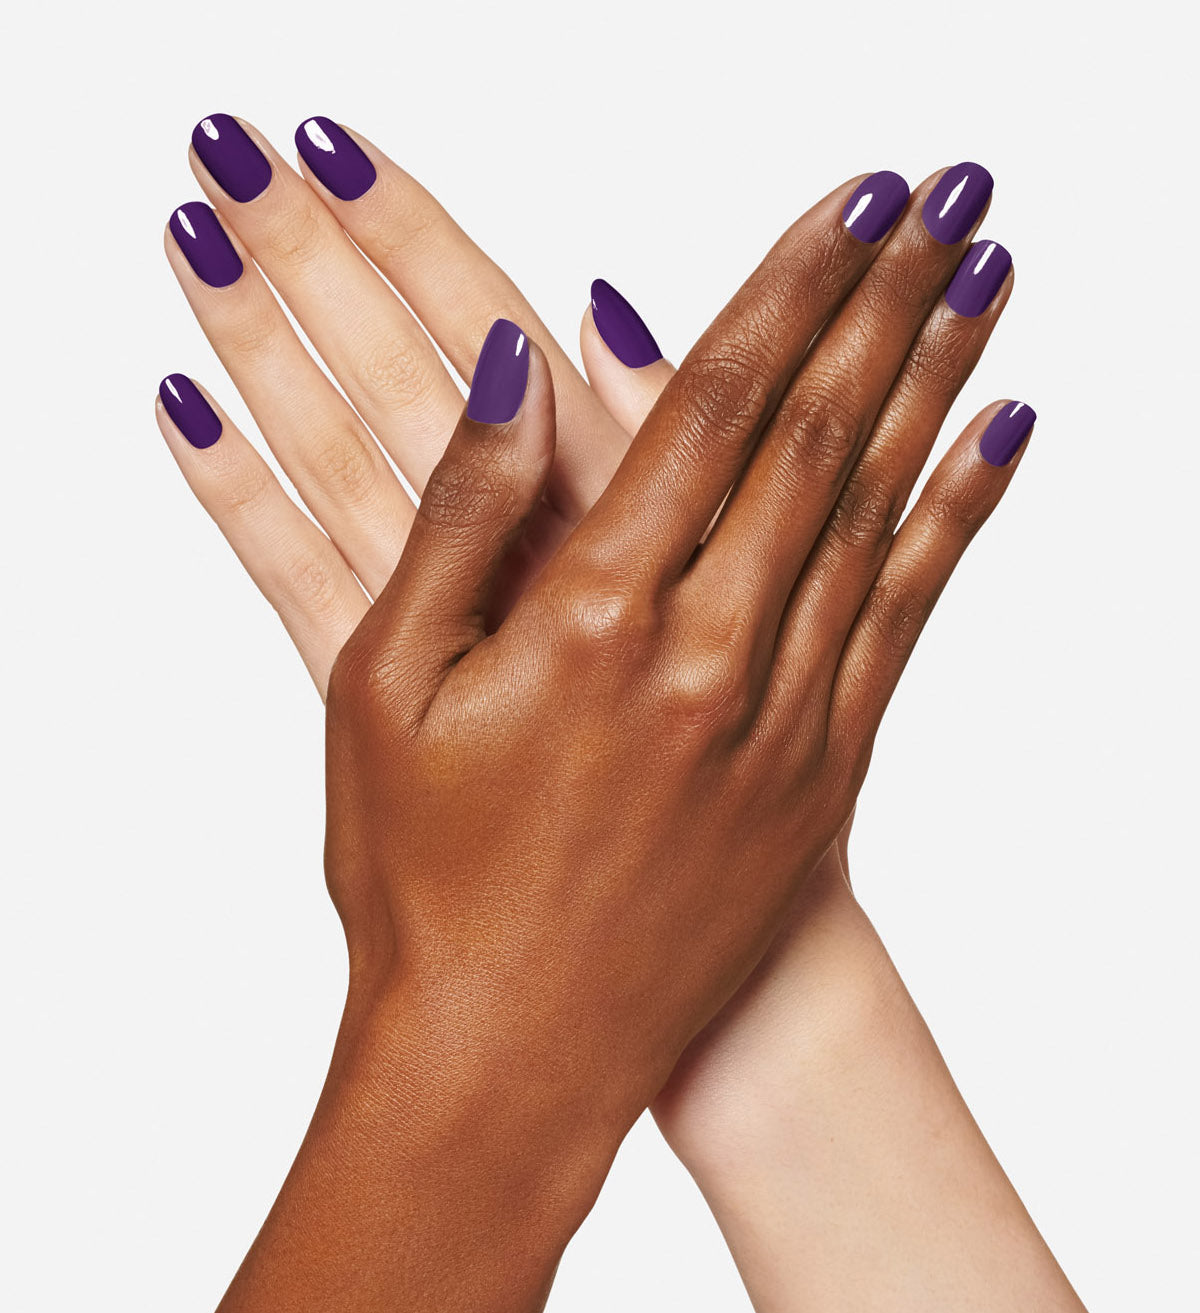 5 Best Nail Colors For Dark Skin In 2023 – Maniology